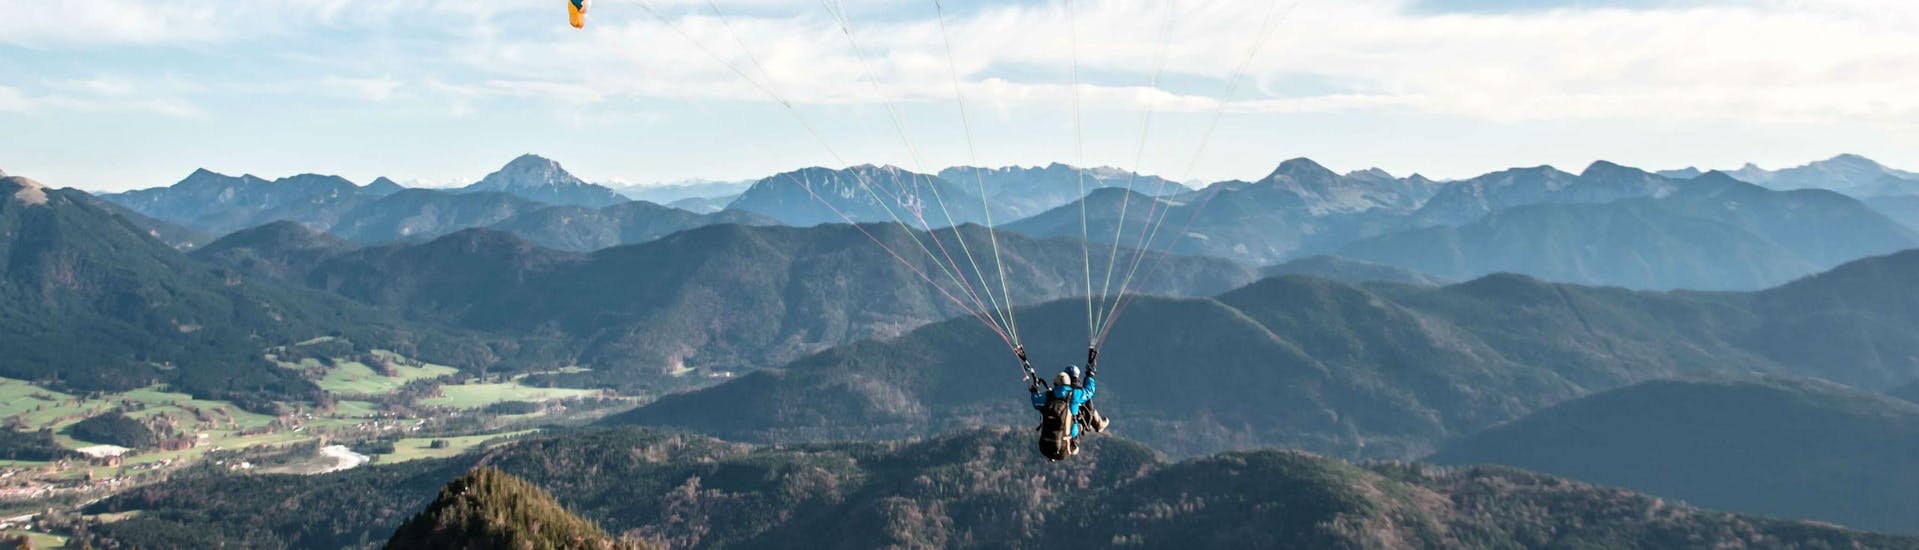 tandem-paragliding-in-wallberg-and-brauneck-free-style-acro-paraworth-hero